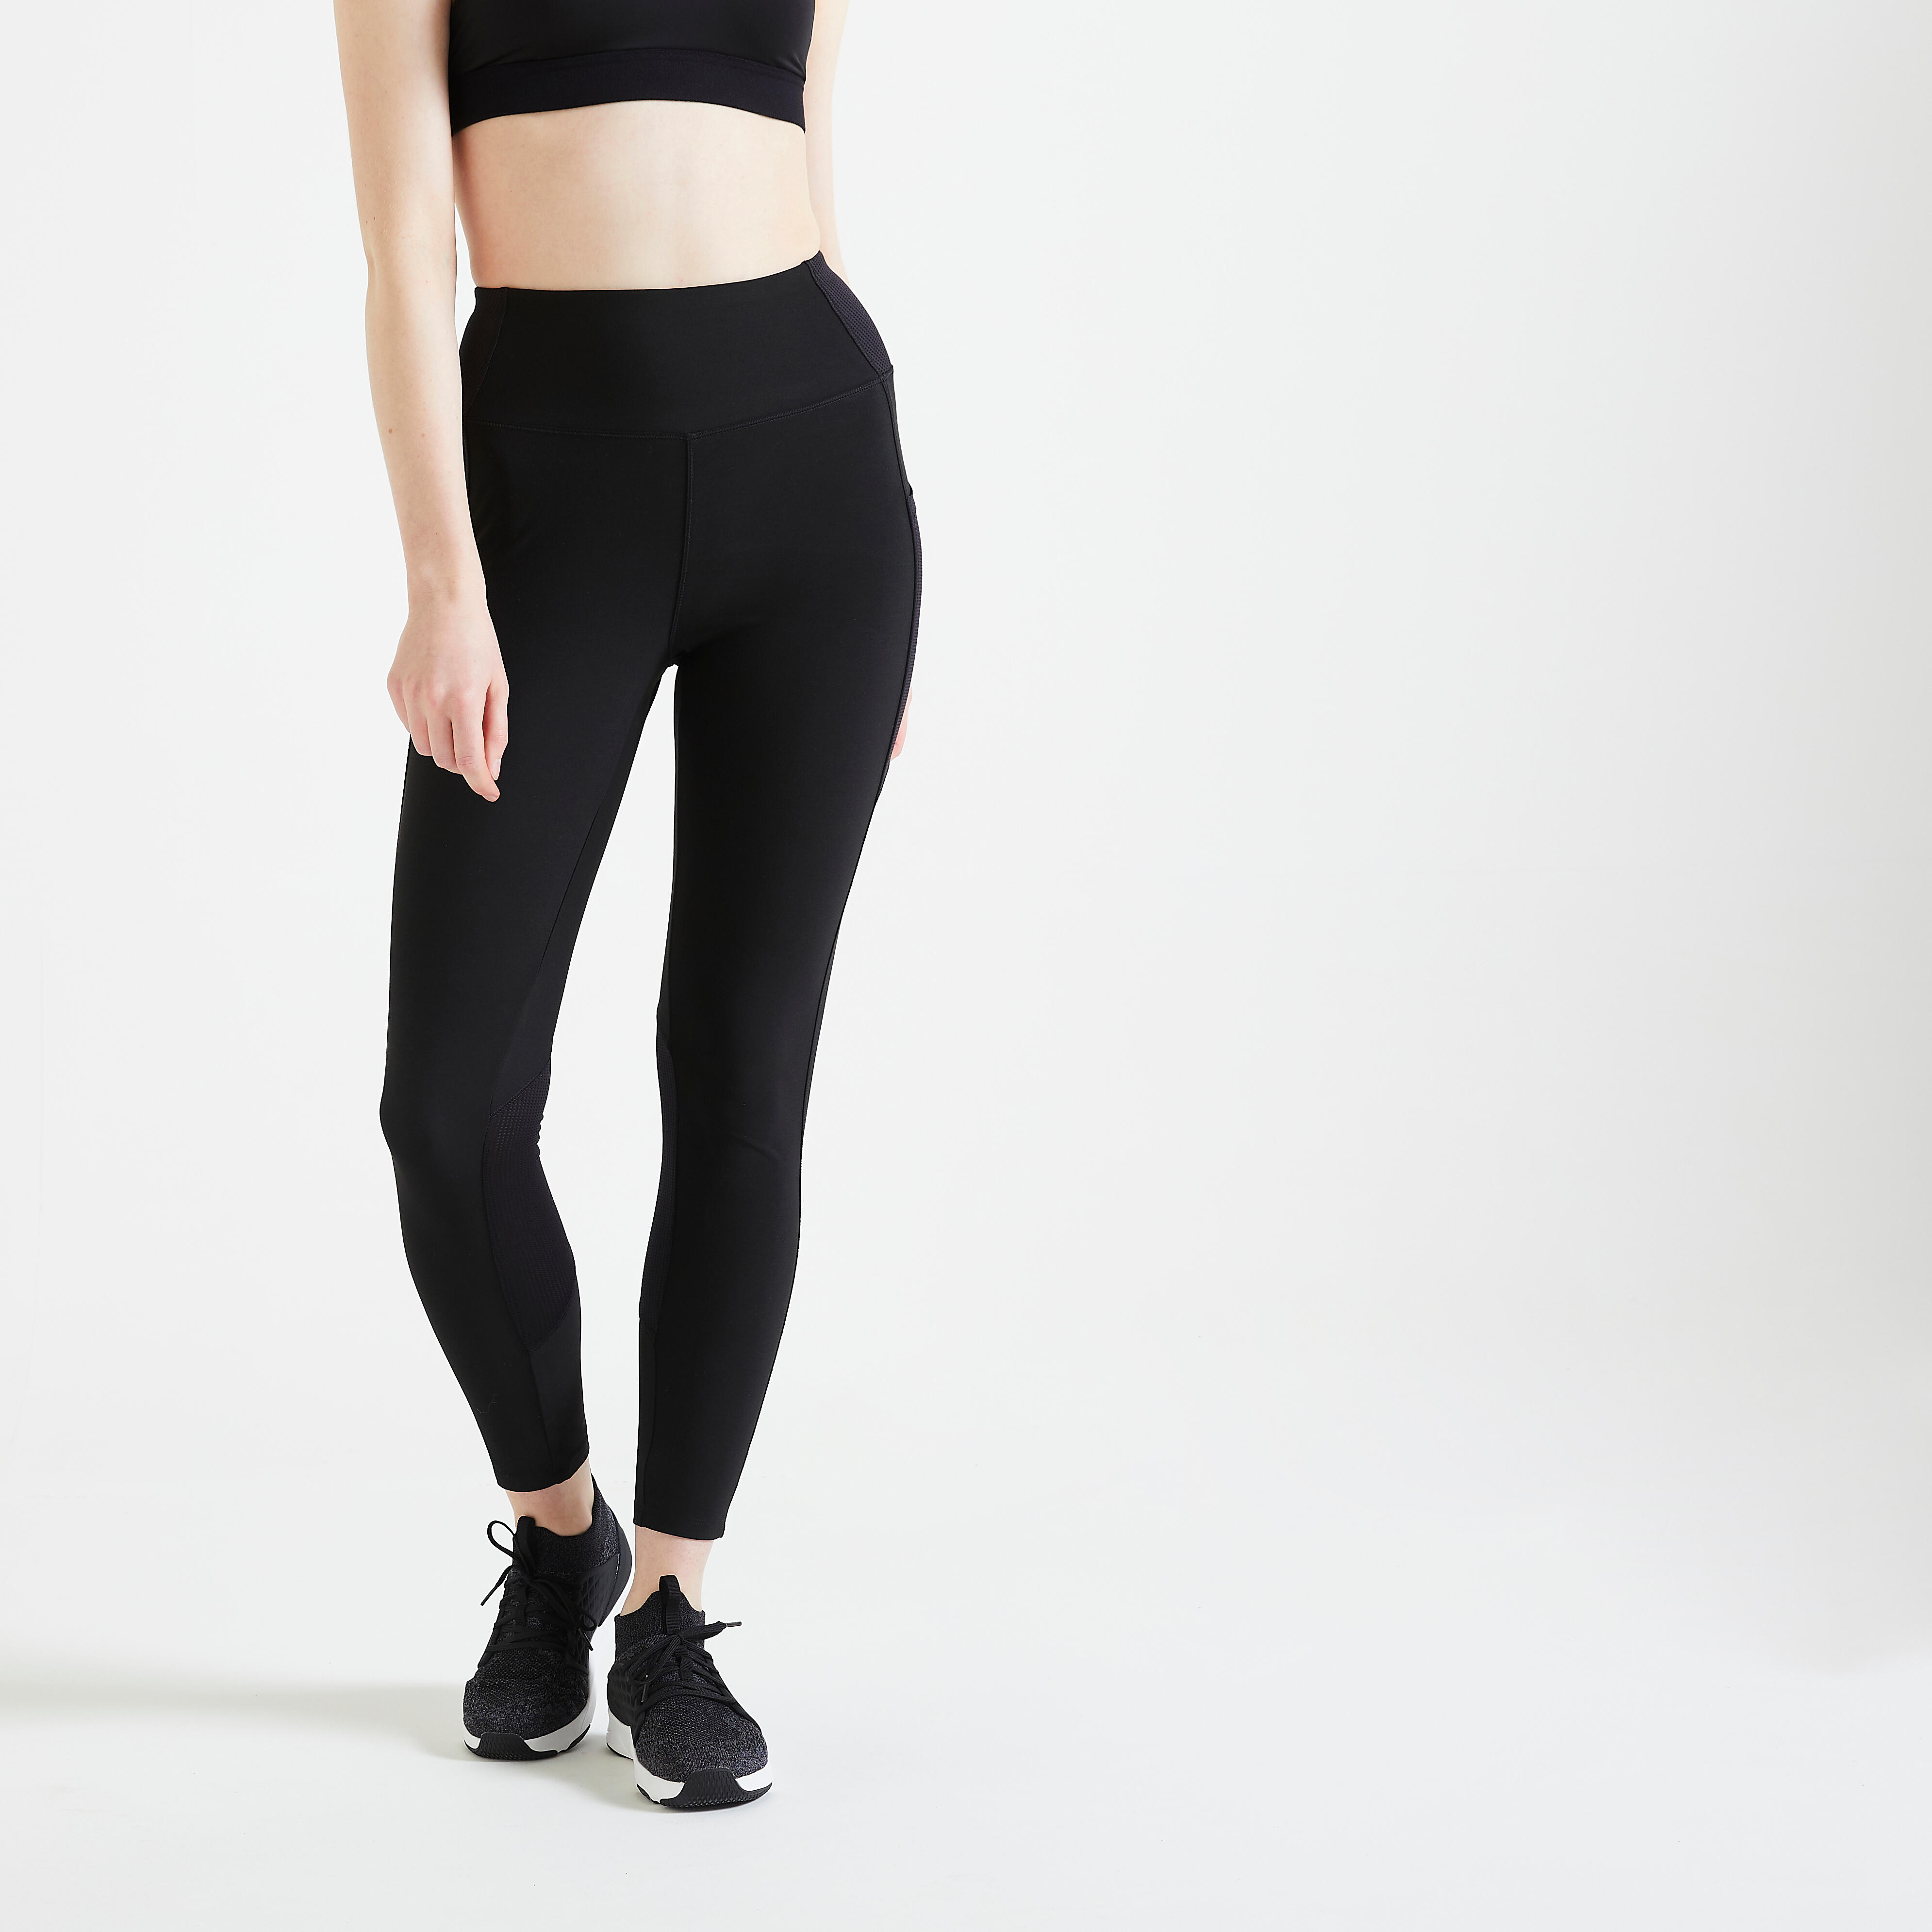 Decathlon launches 'leggings for everyone' as part of body positive gym  range